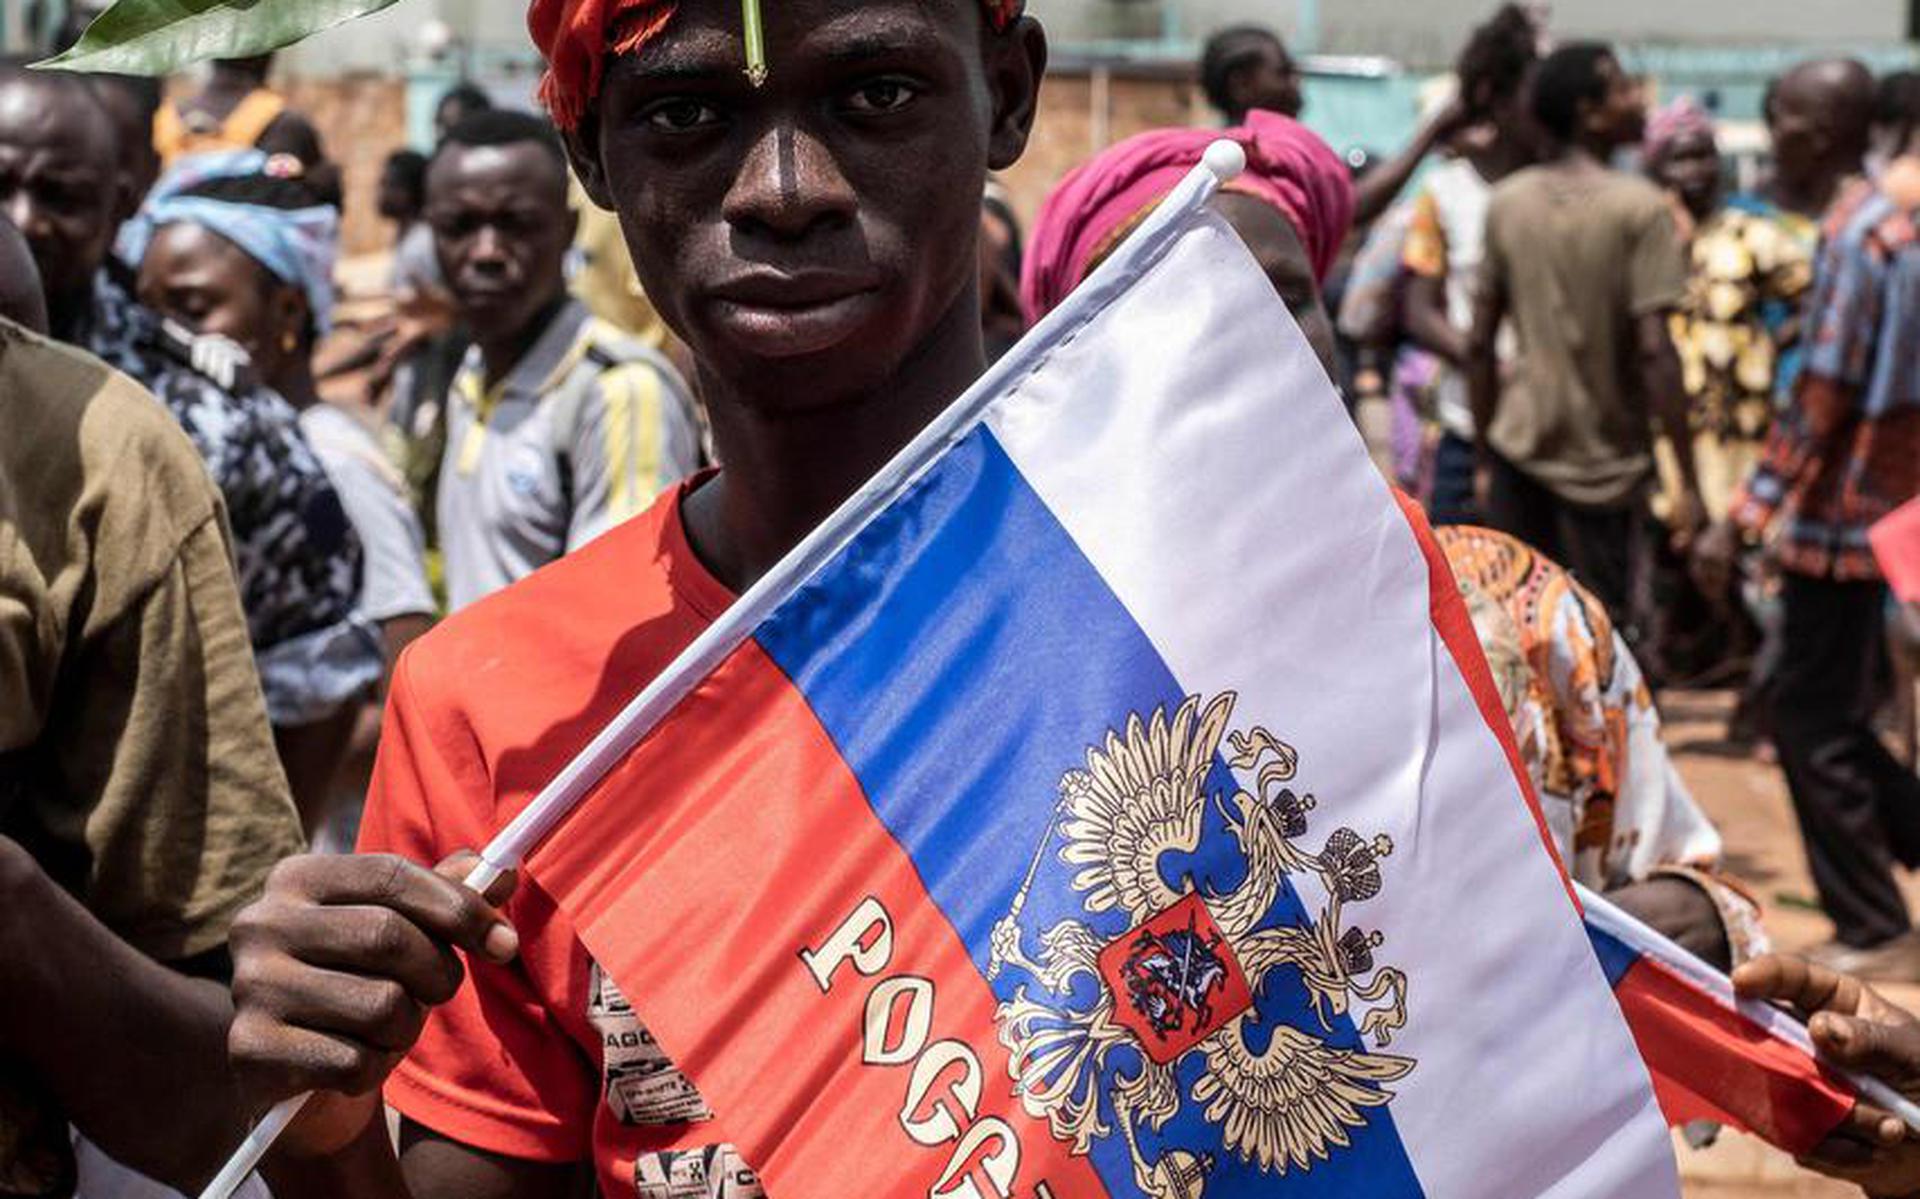 A demonstrator with foliage on to his head, a sign of compassion in Central African Republic, holds a Russian flag with the emblem of Russia on while posing for a portrait in Bangui, on March 22, 2023 during a march in support of Russia and China's presence in the Central African Republic. - Central African RepublicÂ authorities have opened an investigation into the deaths of nine Chinese nationals killed in an attack on a gold mine in the centre of the country on March 19, 2023. Taking advantage of the vacuum created by the departure of the bulk of French troops, Moscow sent "military instructors" to the country in 2018, then hundreds of Wagner paramilitaries in 2020 at the request of Bangui, faced with a threatening rebellion. (Photo by Barbara DEBOUT / AFP)